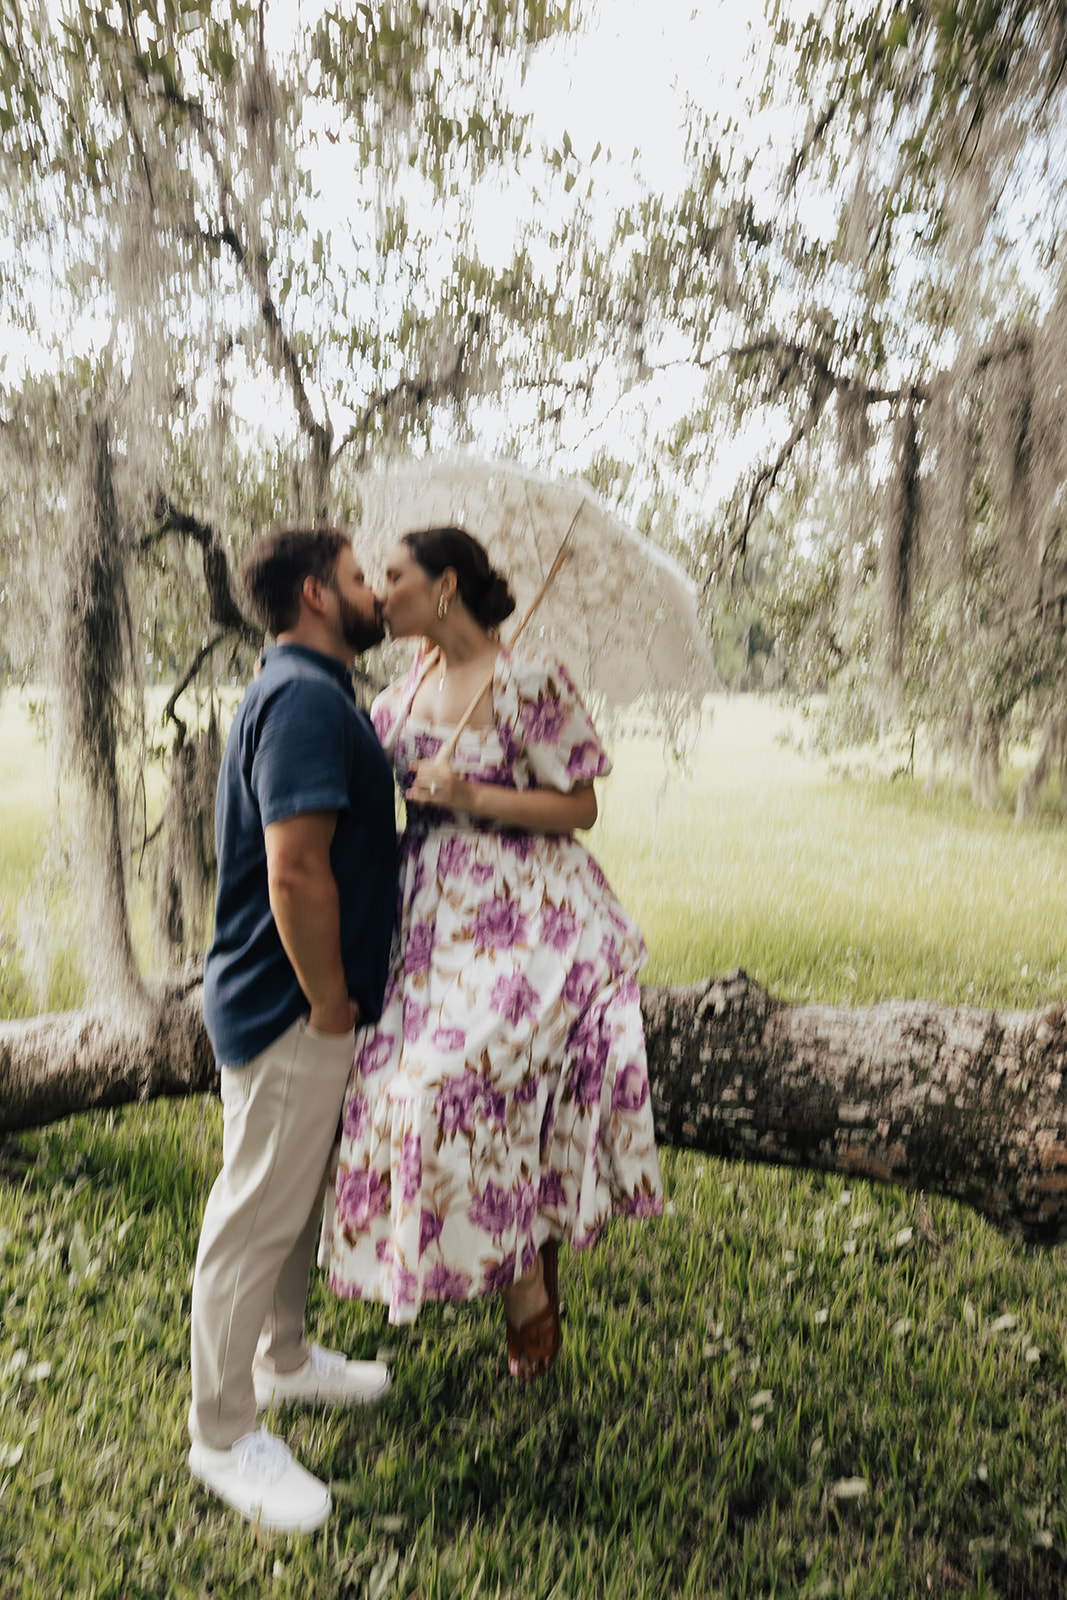 Romantic kiss. Woman sitting on oak tree branch holding parasol. Man stands in front of her and shares a kiss during magnolia plantation proposal